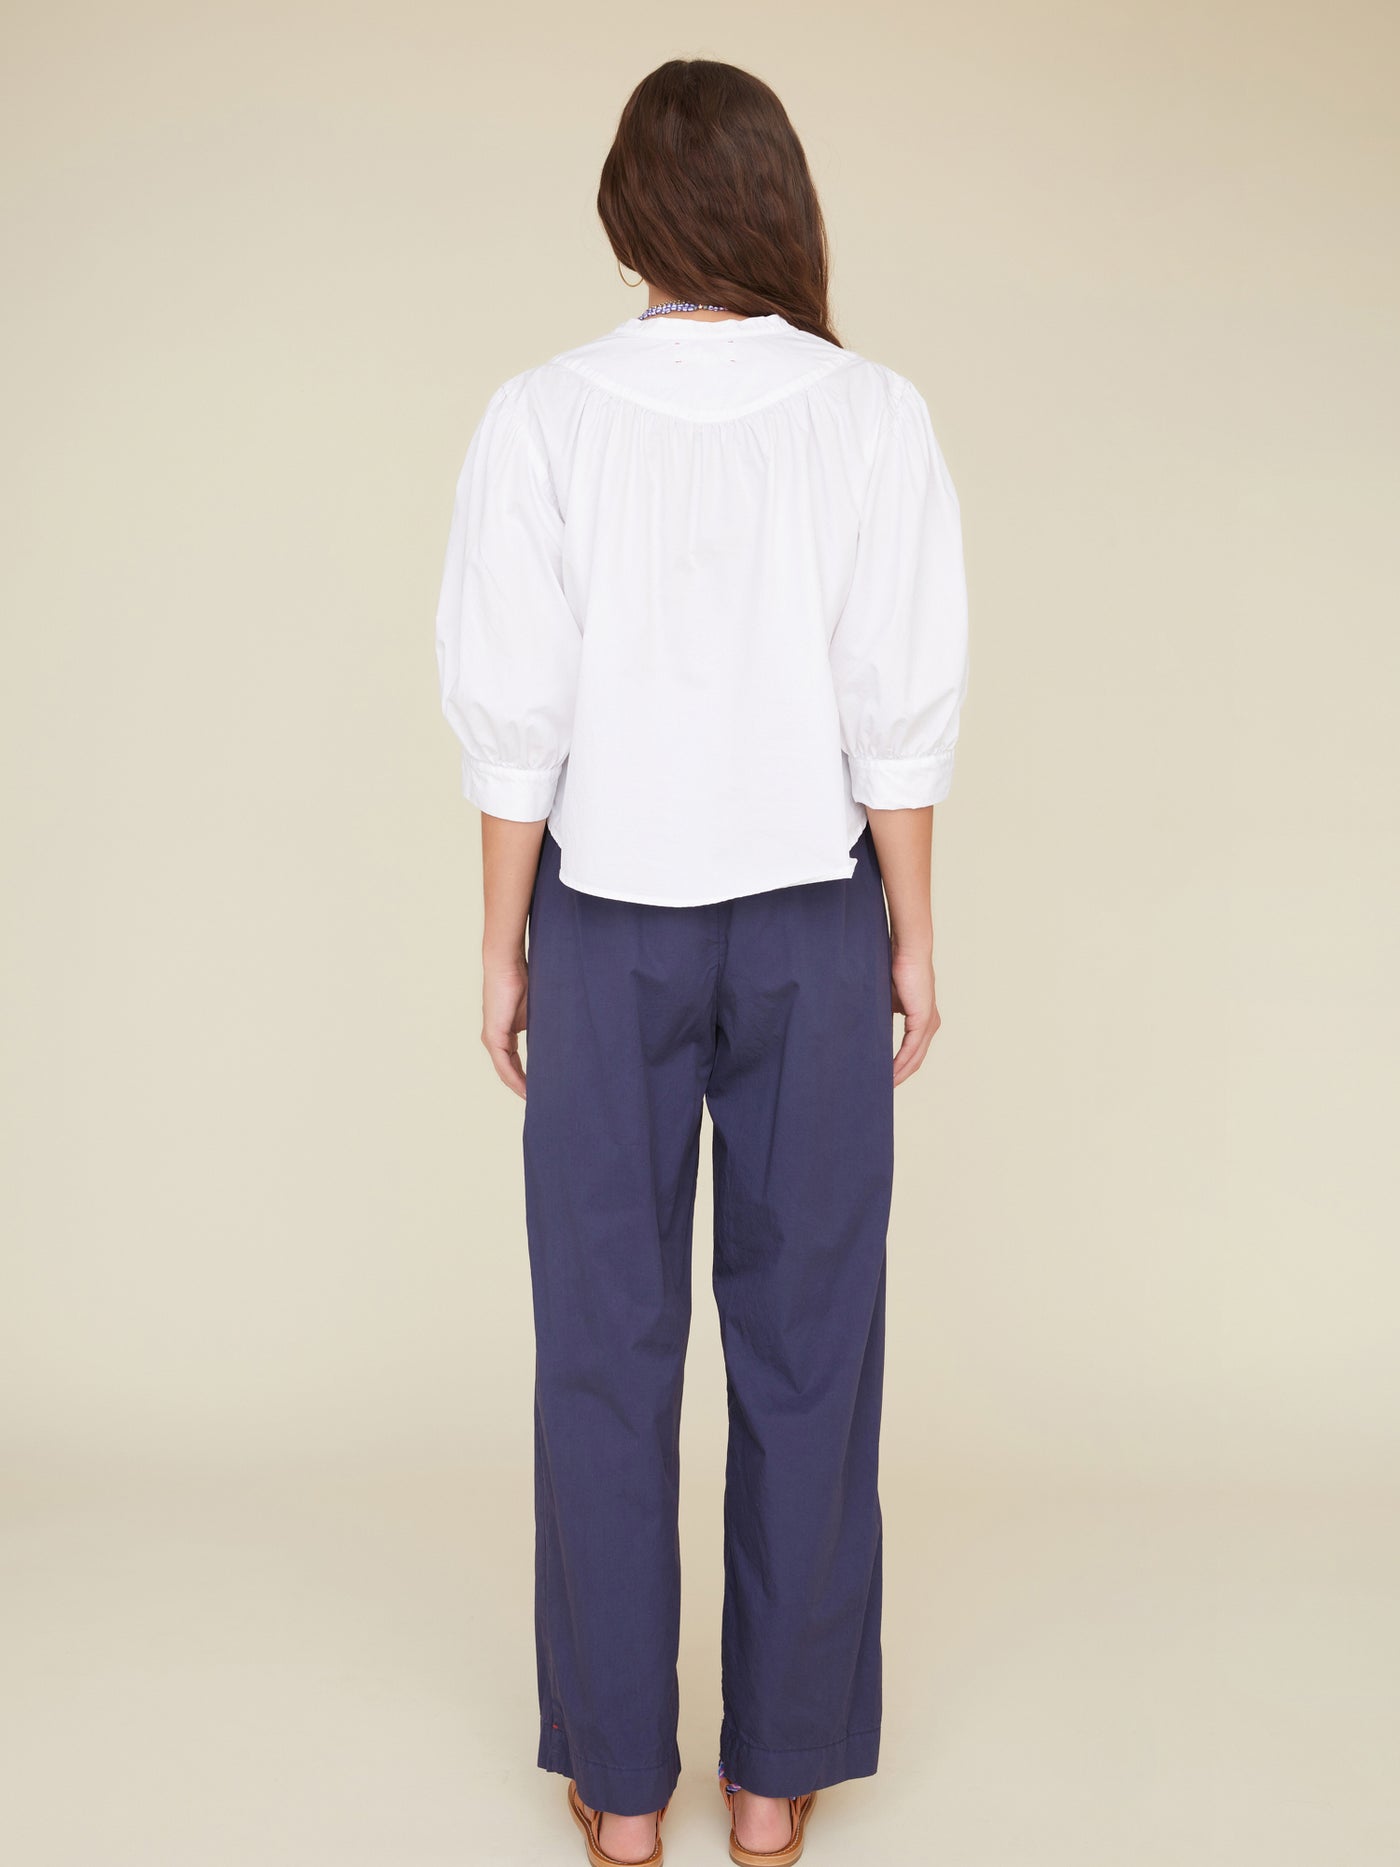 Xirena Demsey Pant in Midnight